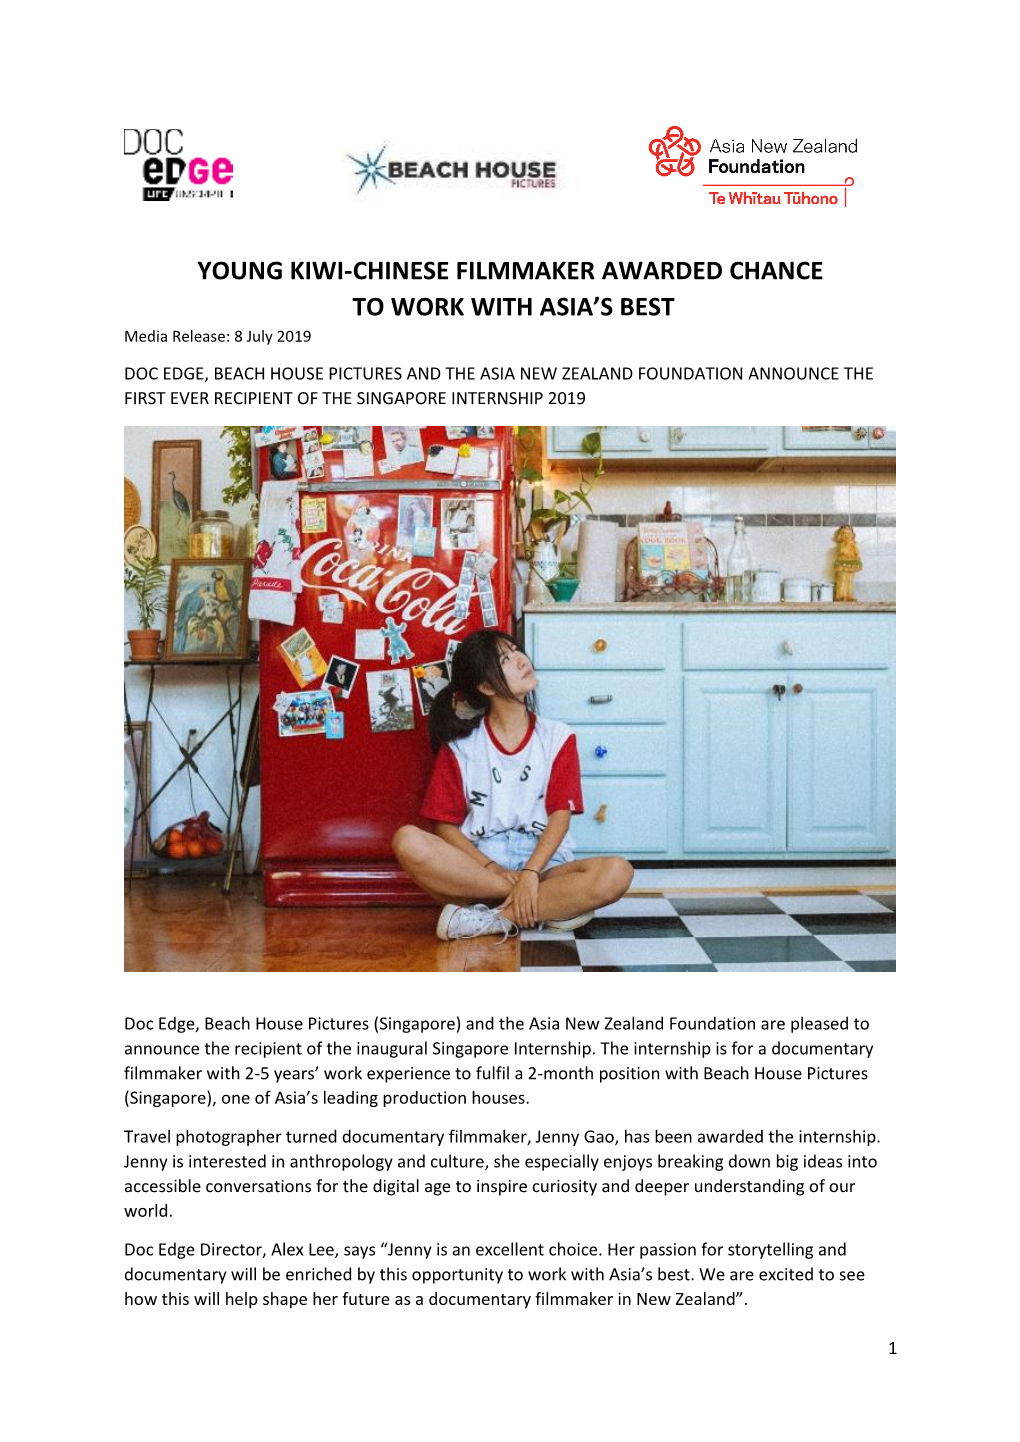 YOUNG KIWI-CHINESE FILMMAKER AWARDED CHANCE to WORK with ASIA’S BEST Media Release: 8 July 2019